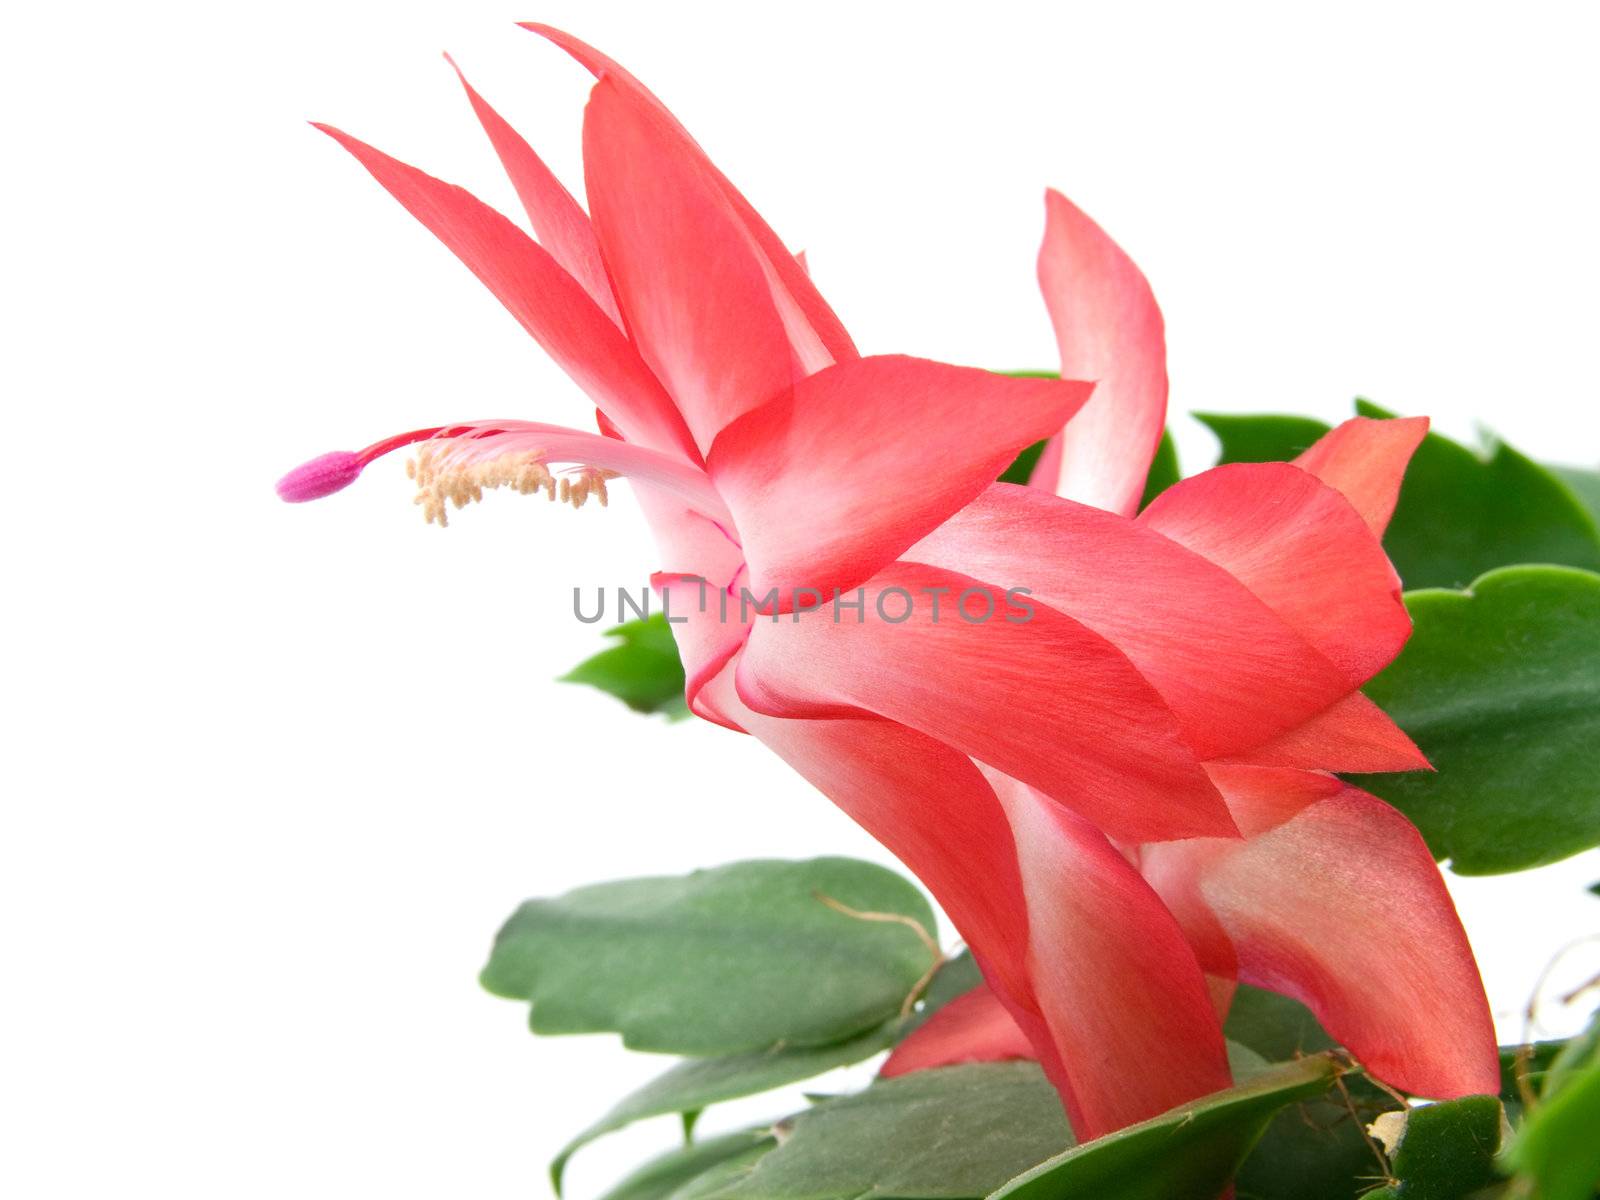  Christmas cactus on a white background by motorolka